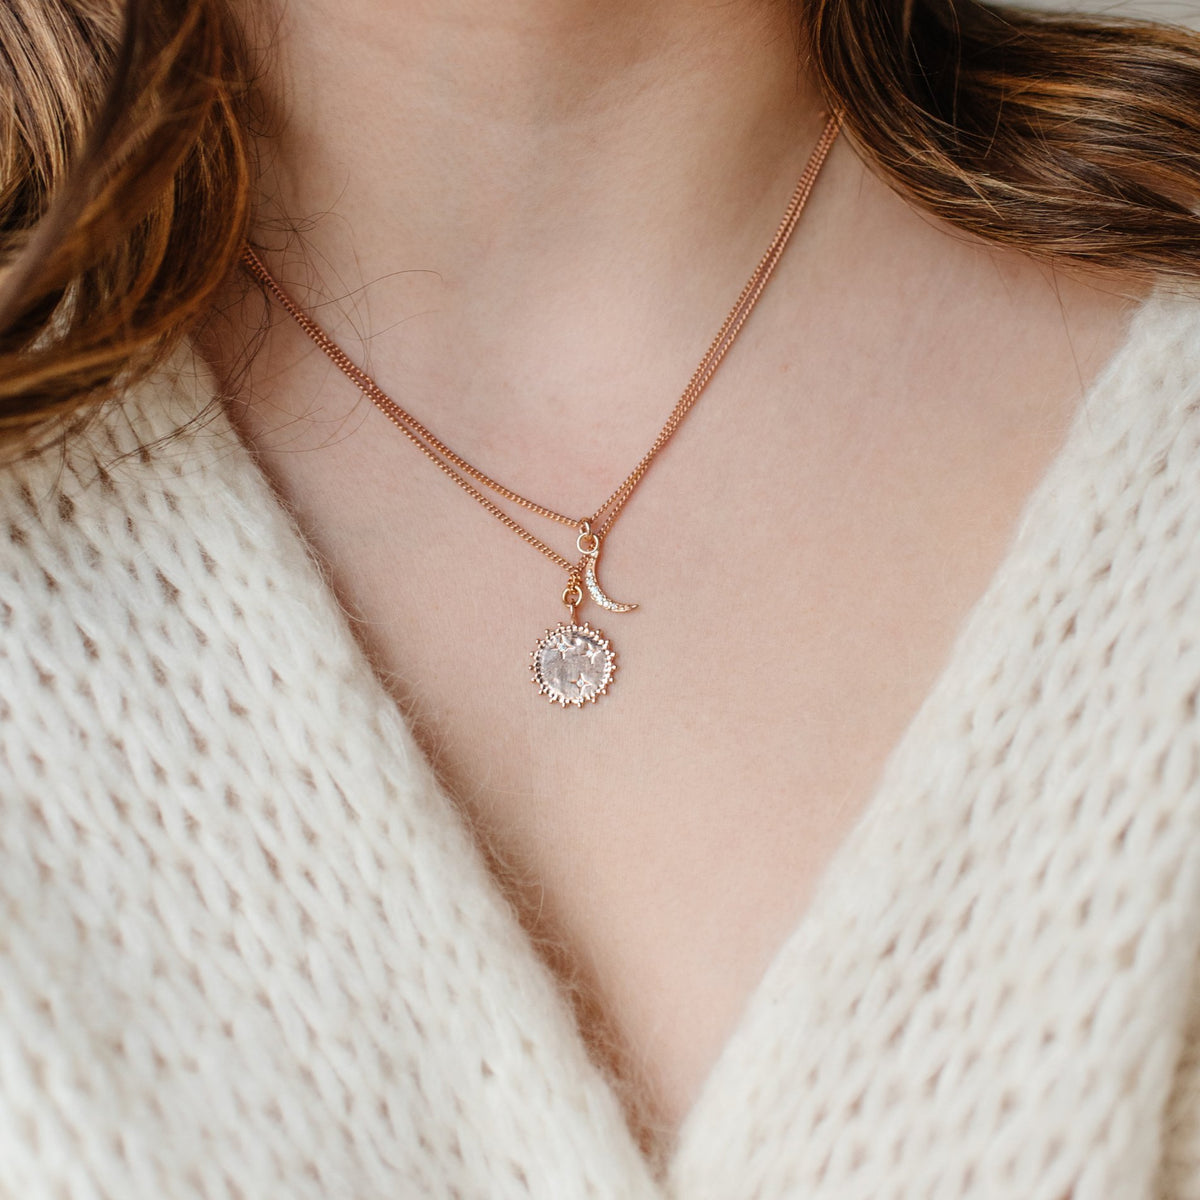 BELIEVE SOLEIL STAR ICON - CUBIC ZIRCONIA &amp; ROSE GOLD - SO PRETTY CARA COTTER